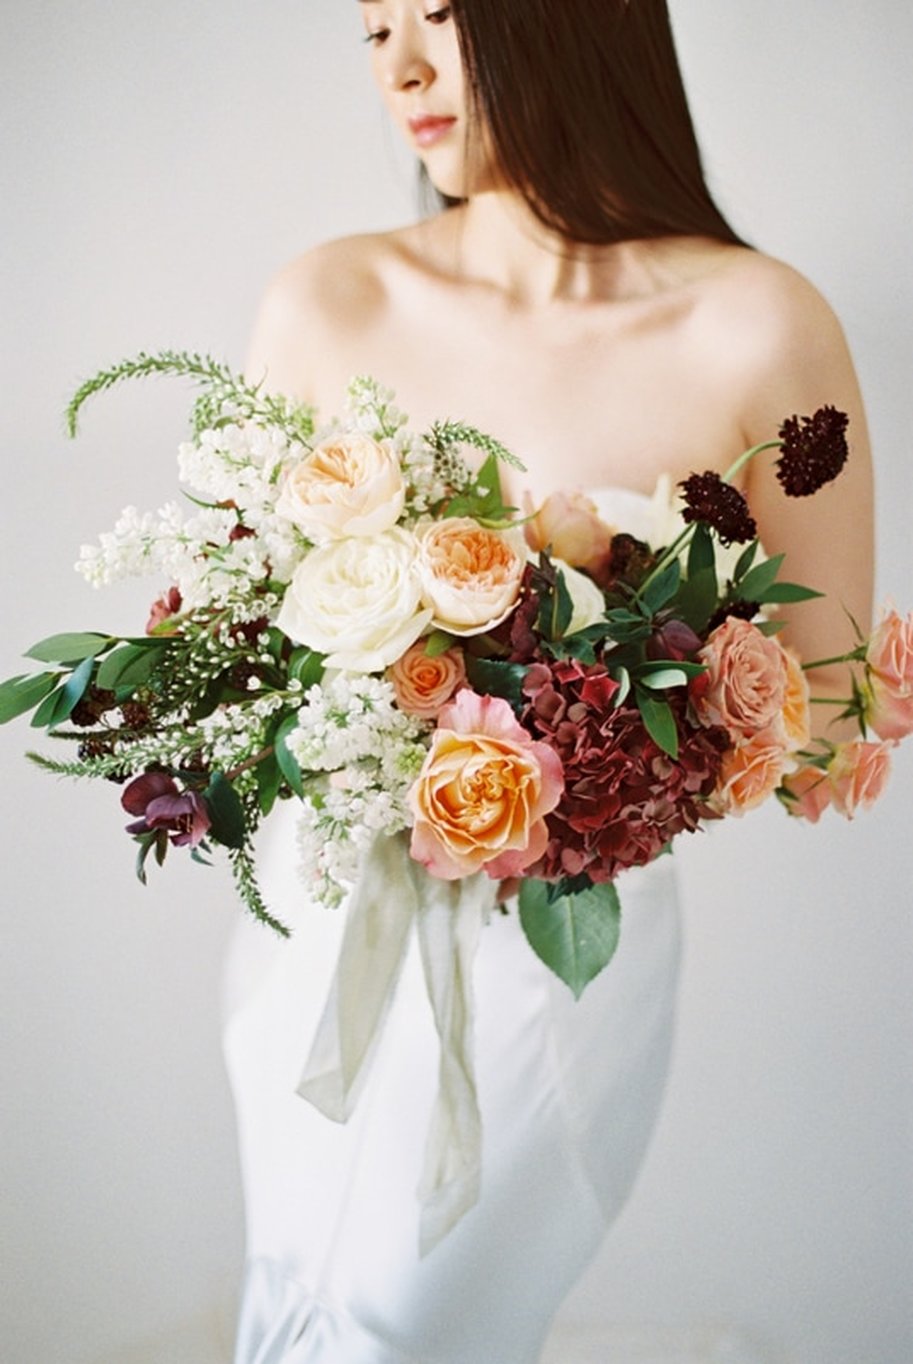 Style Me Pretty - Bouquet Price Comparisons - Beauty Editorial Photography